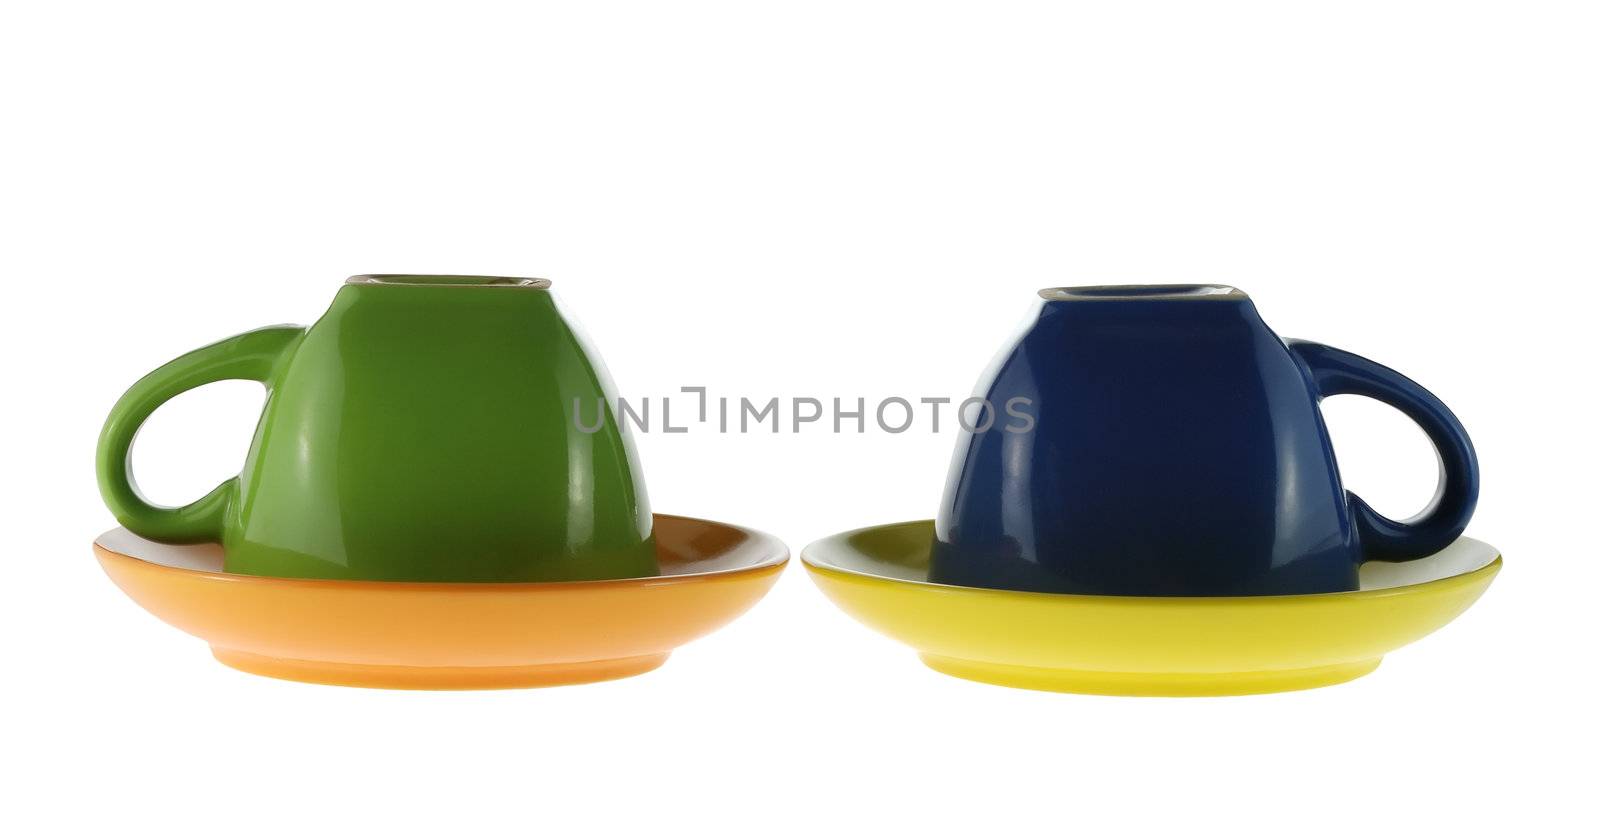 Color cups. Ceramic service from color cups